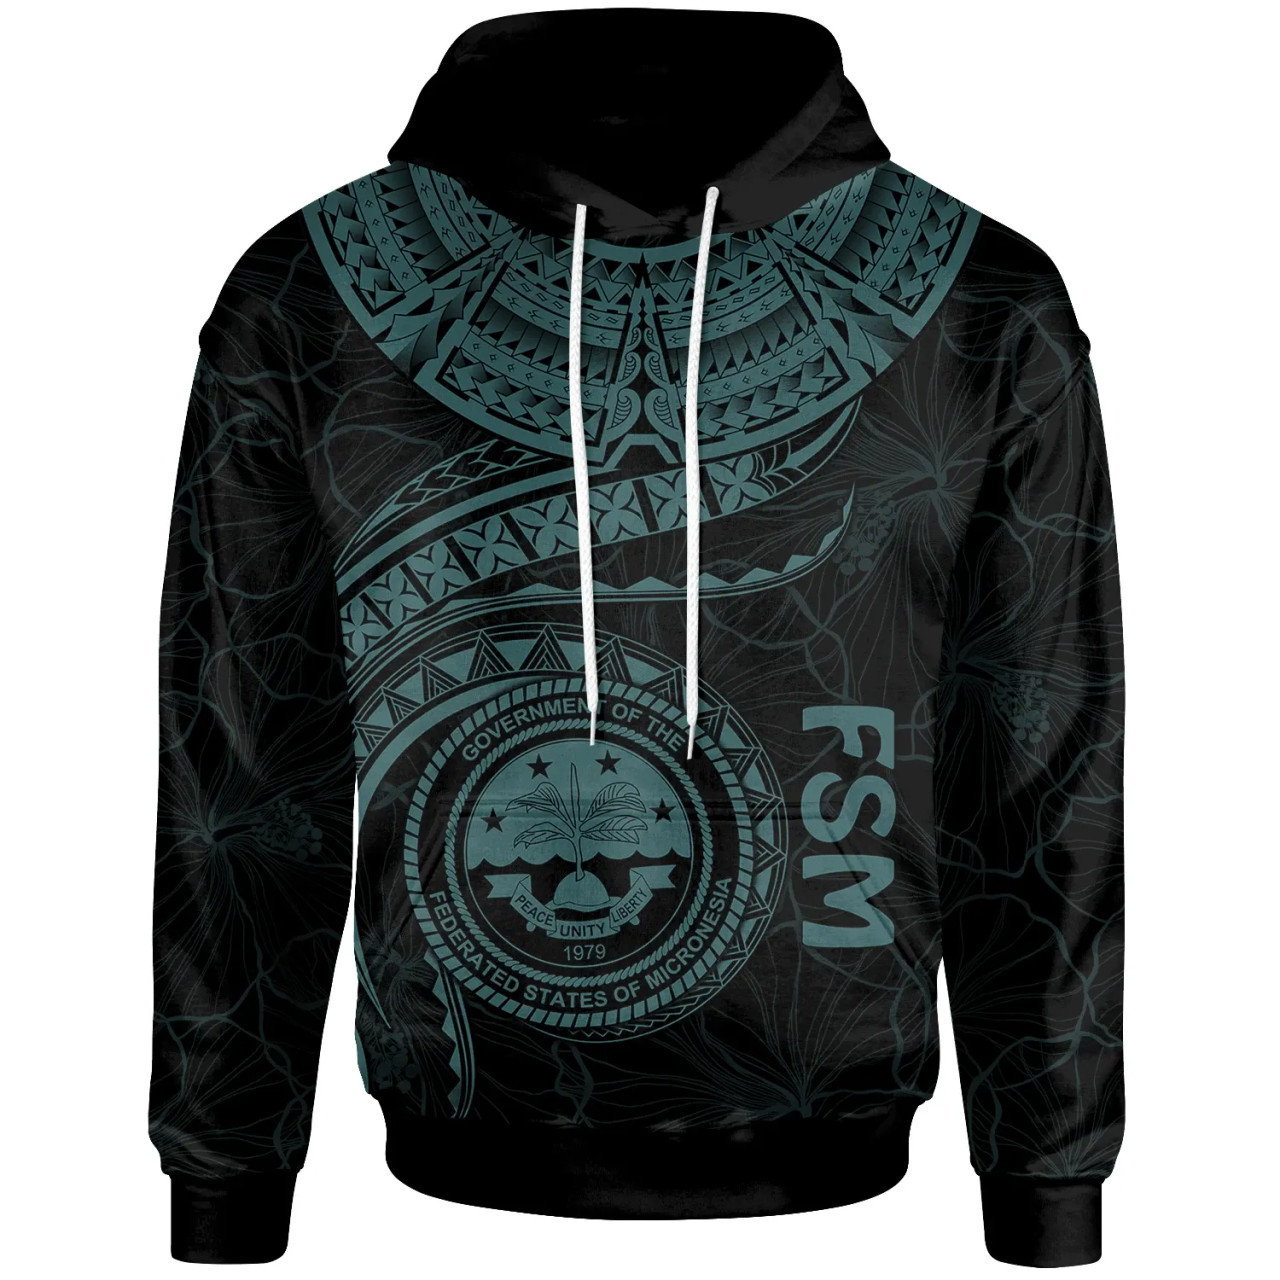 Federated States of Micronesia Polynesian Hoodie - FSM Waves (Turquoise)